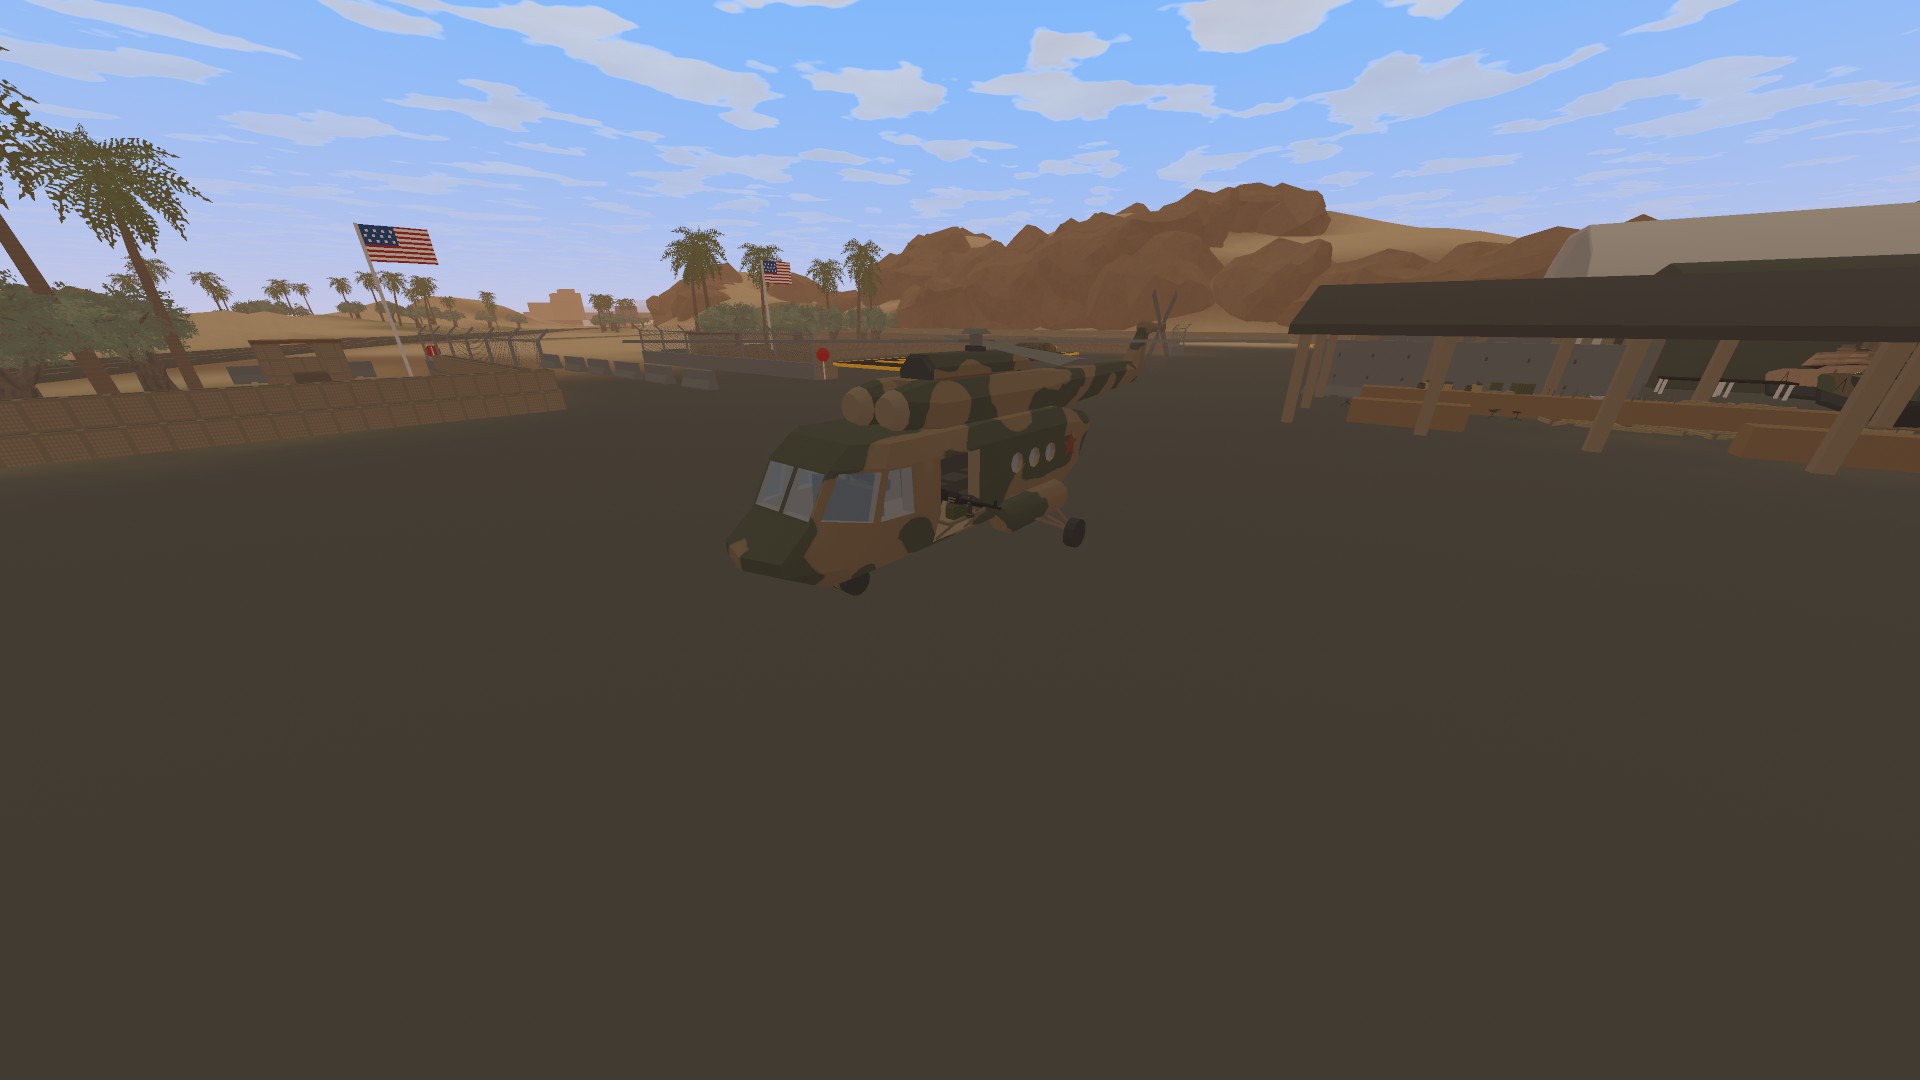 Unturned ID's for vehicles and ammo - MEC Vehicles: - 8C55385